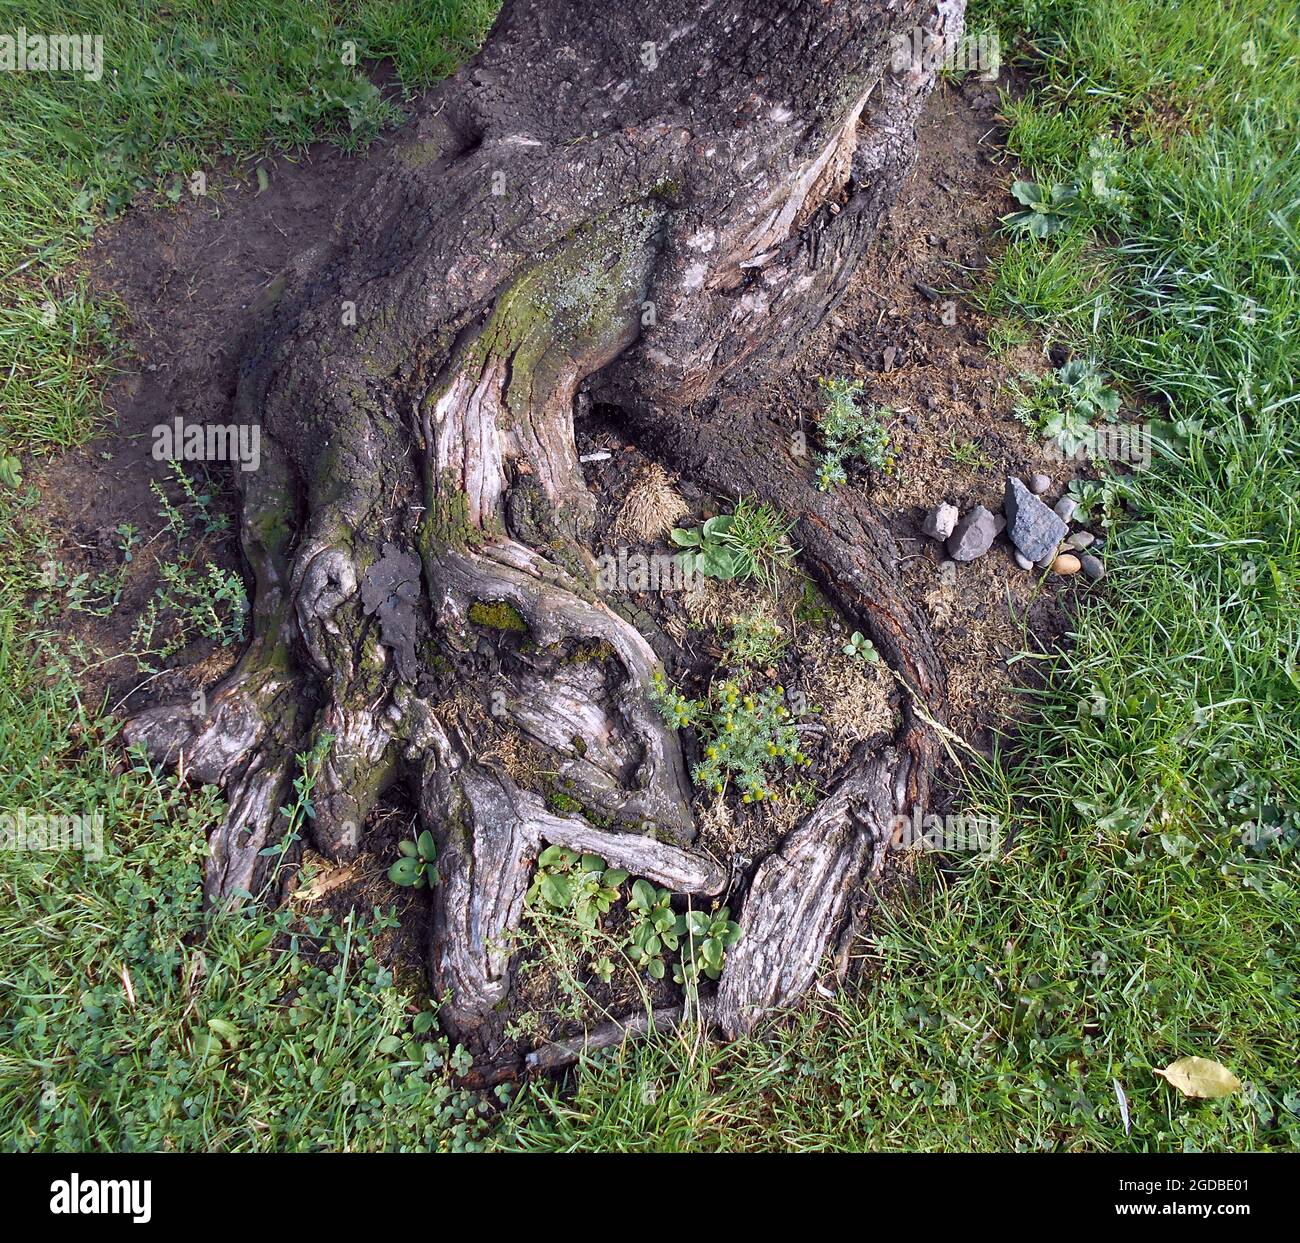 The roots of an old tree have pushed through the soil to grow and a small pile of stones have appeared mysteriously on the ground beside the roots. Glasgow. ©ALAN WYLIE/ALAMY Stock Photo